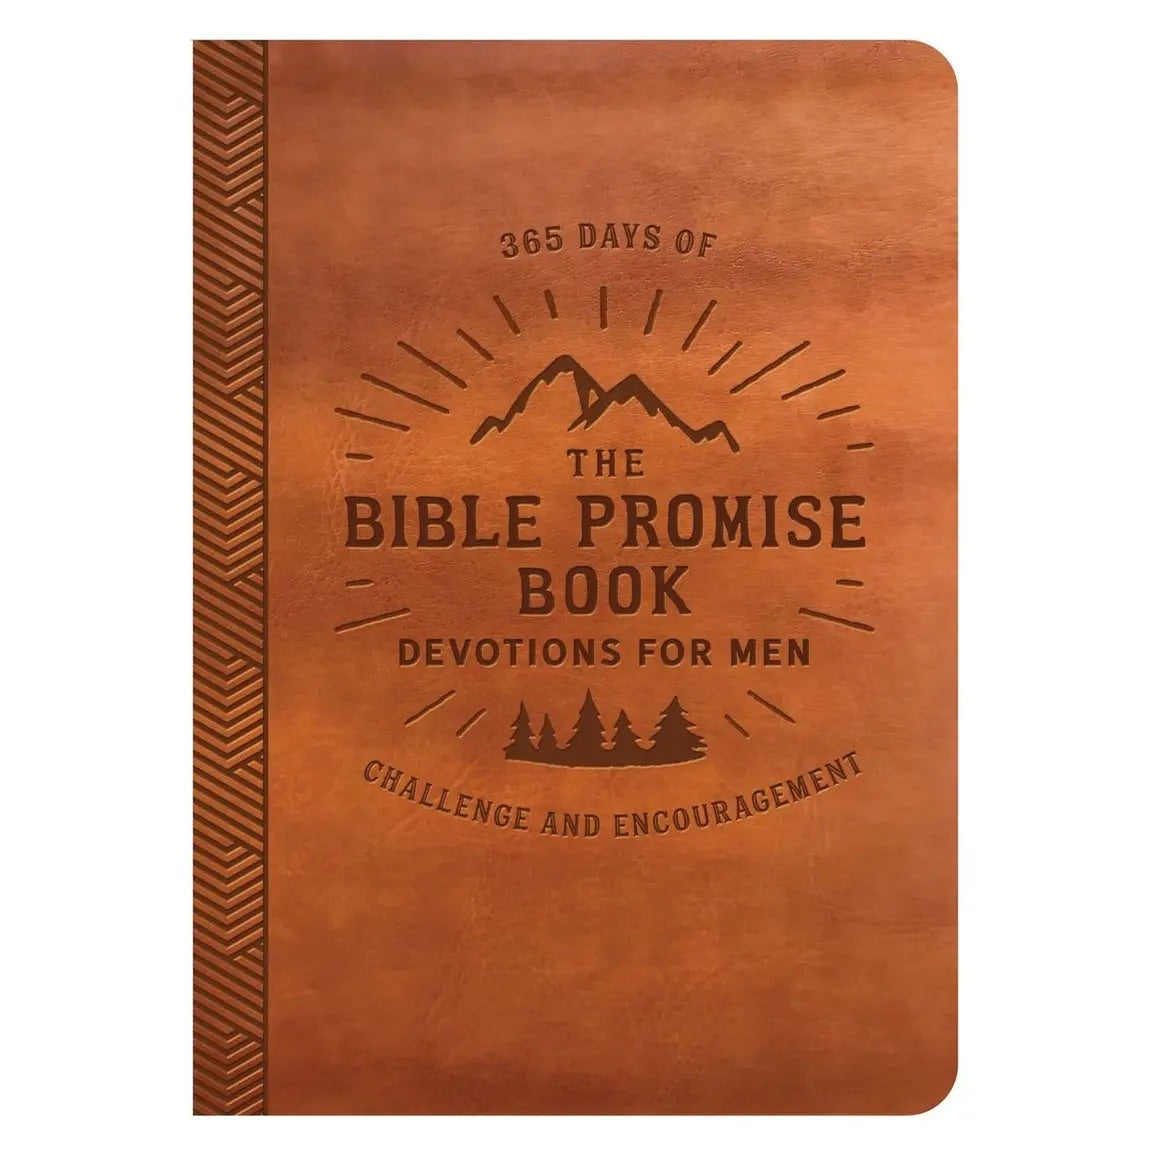 The Bible Promise Book Devotions for Men